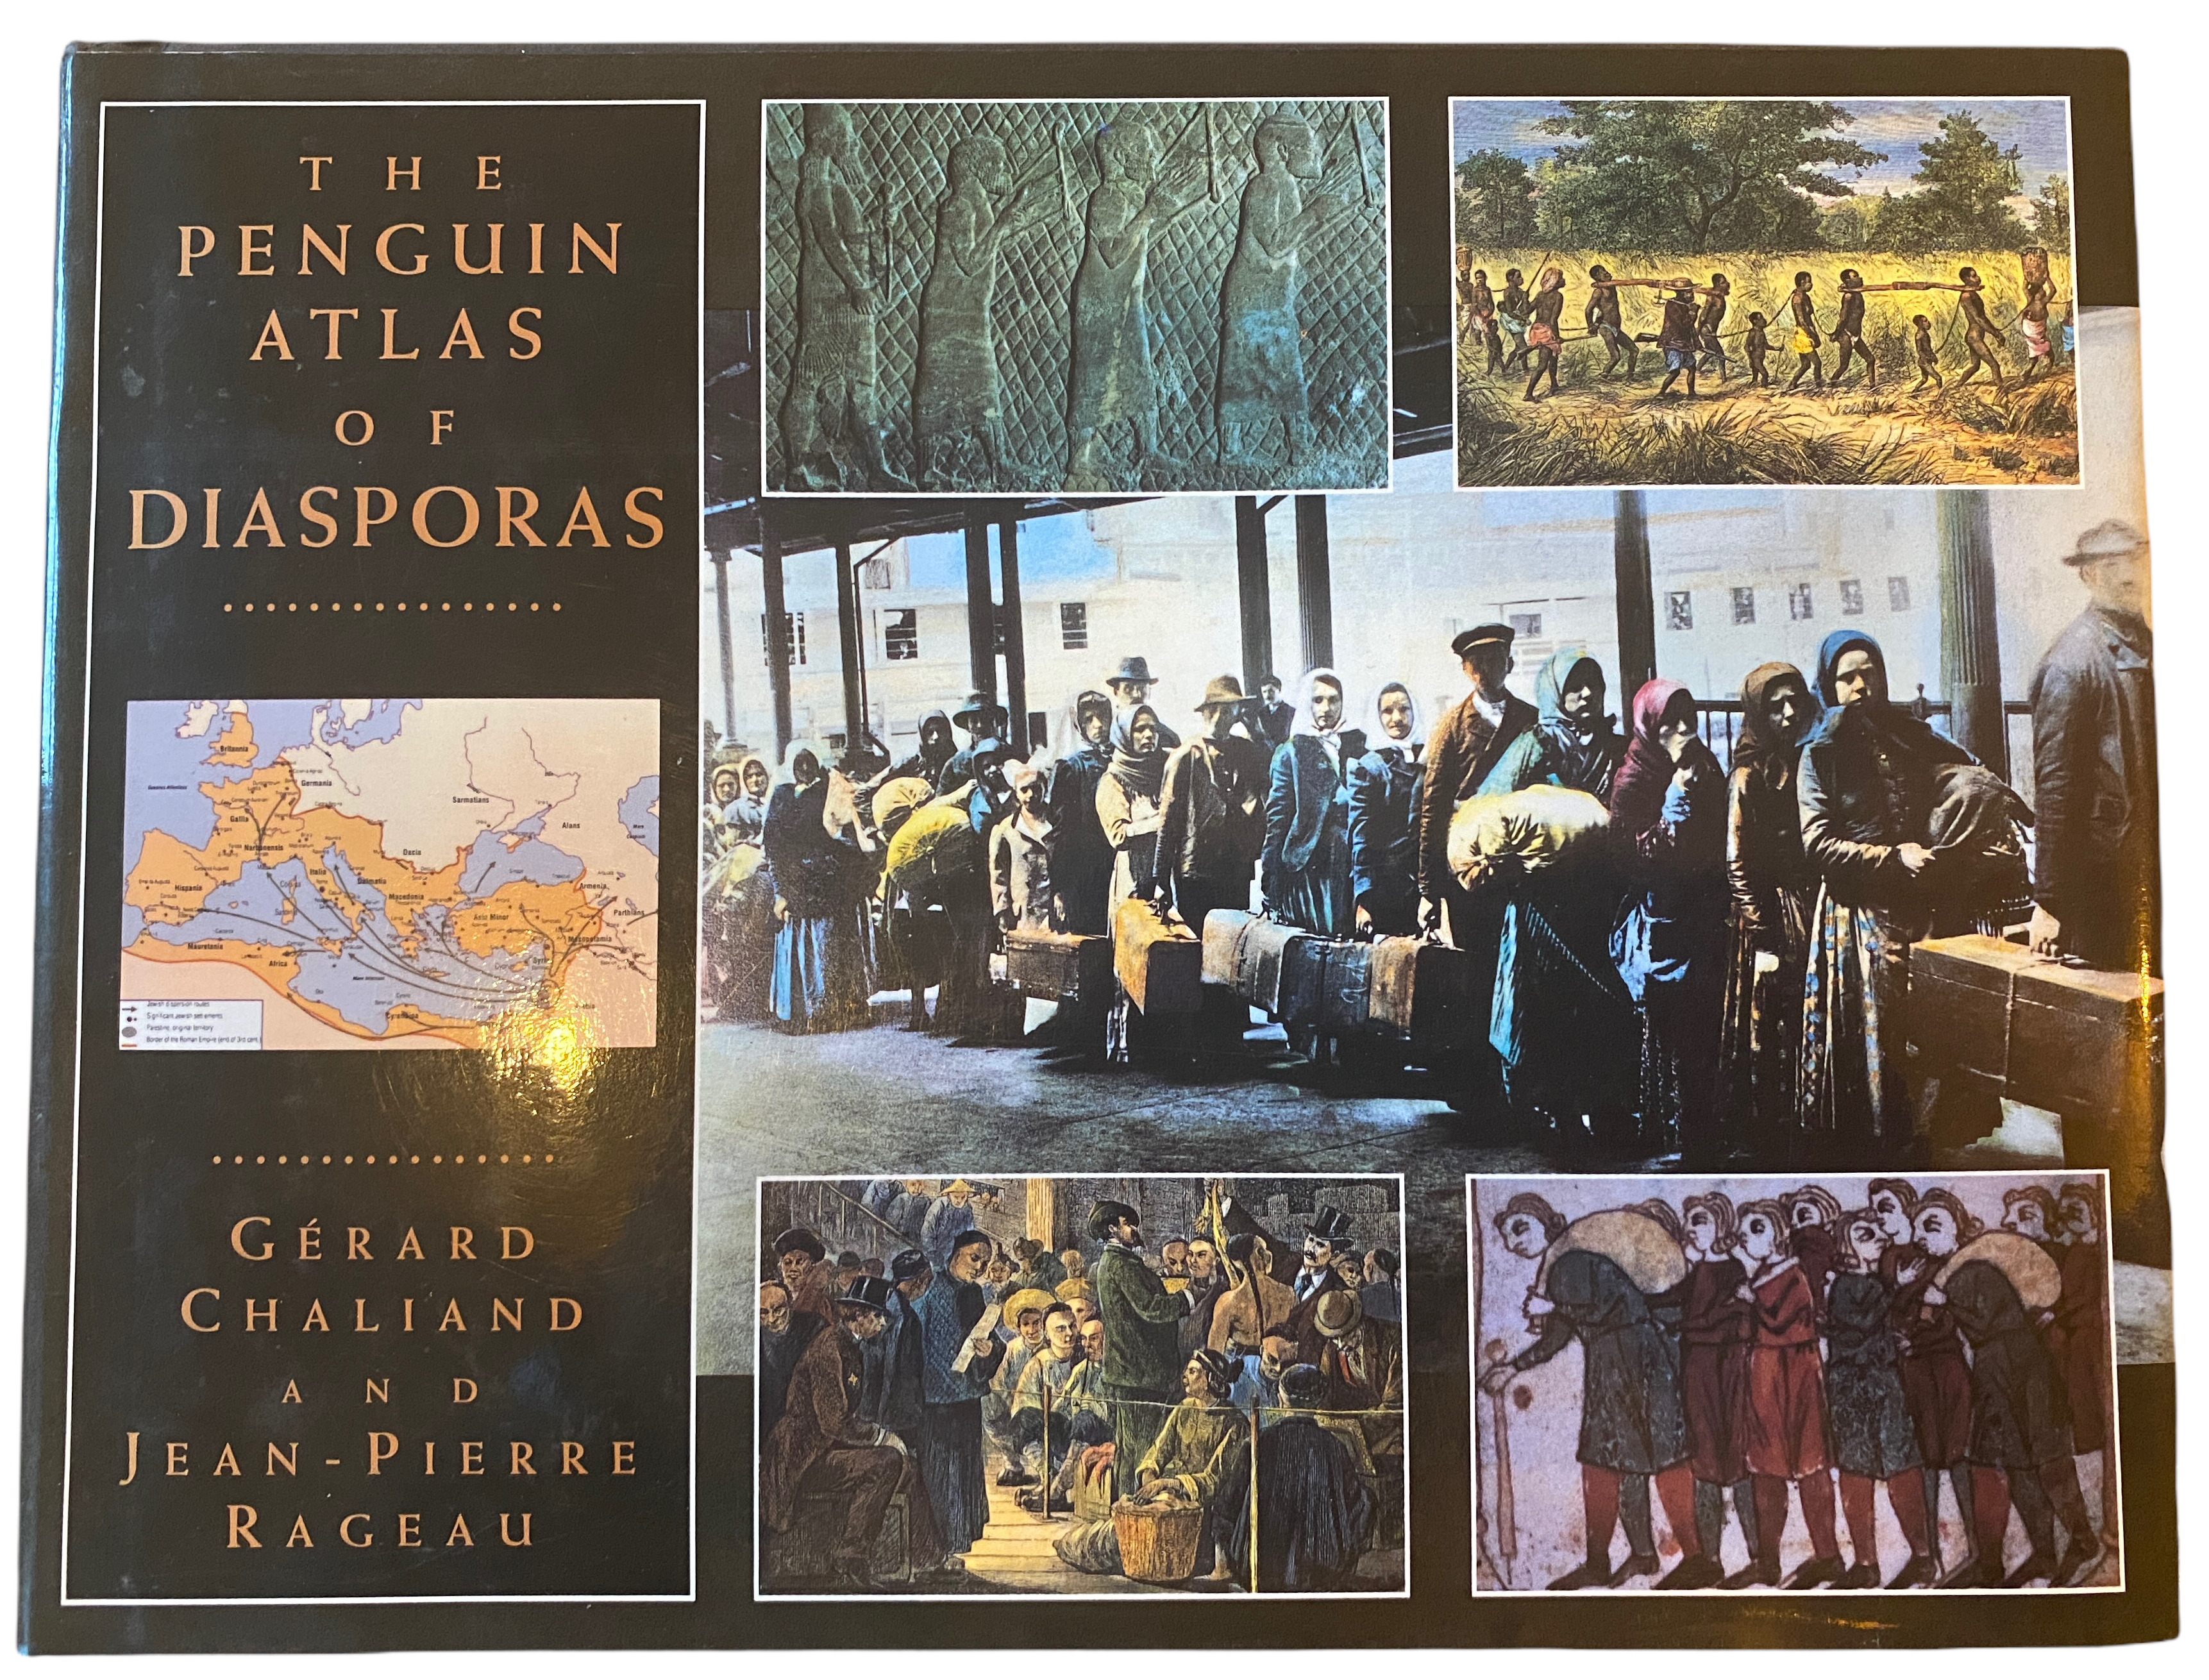 The Penguin Atlas of Diasporas. Maps by Catherine Petit. Translated from the French by A.M. Berrett - CHALIAND, Gerard & RAGEAU, Jean-Pierre